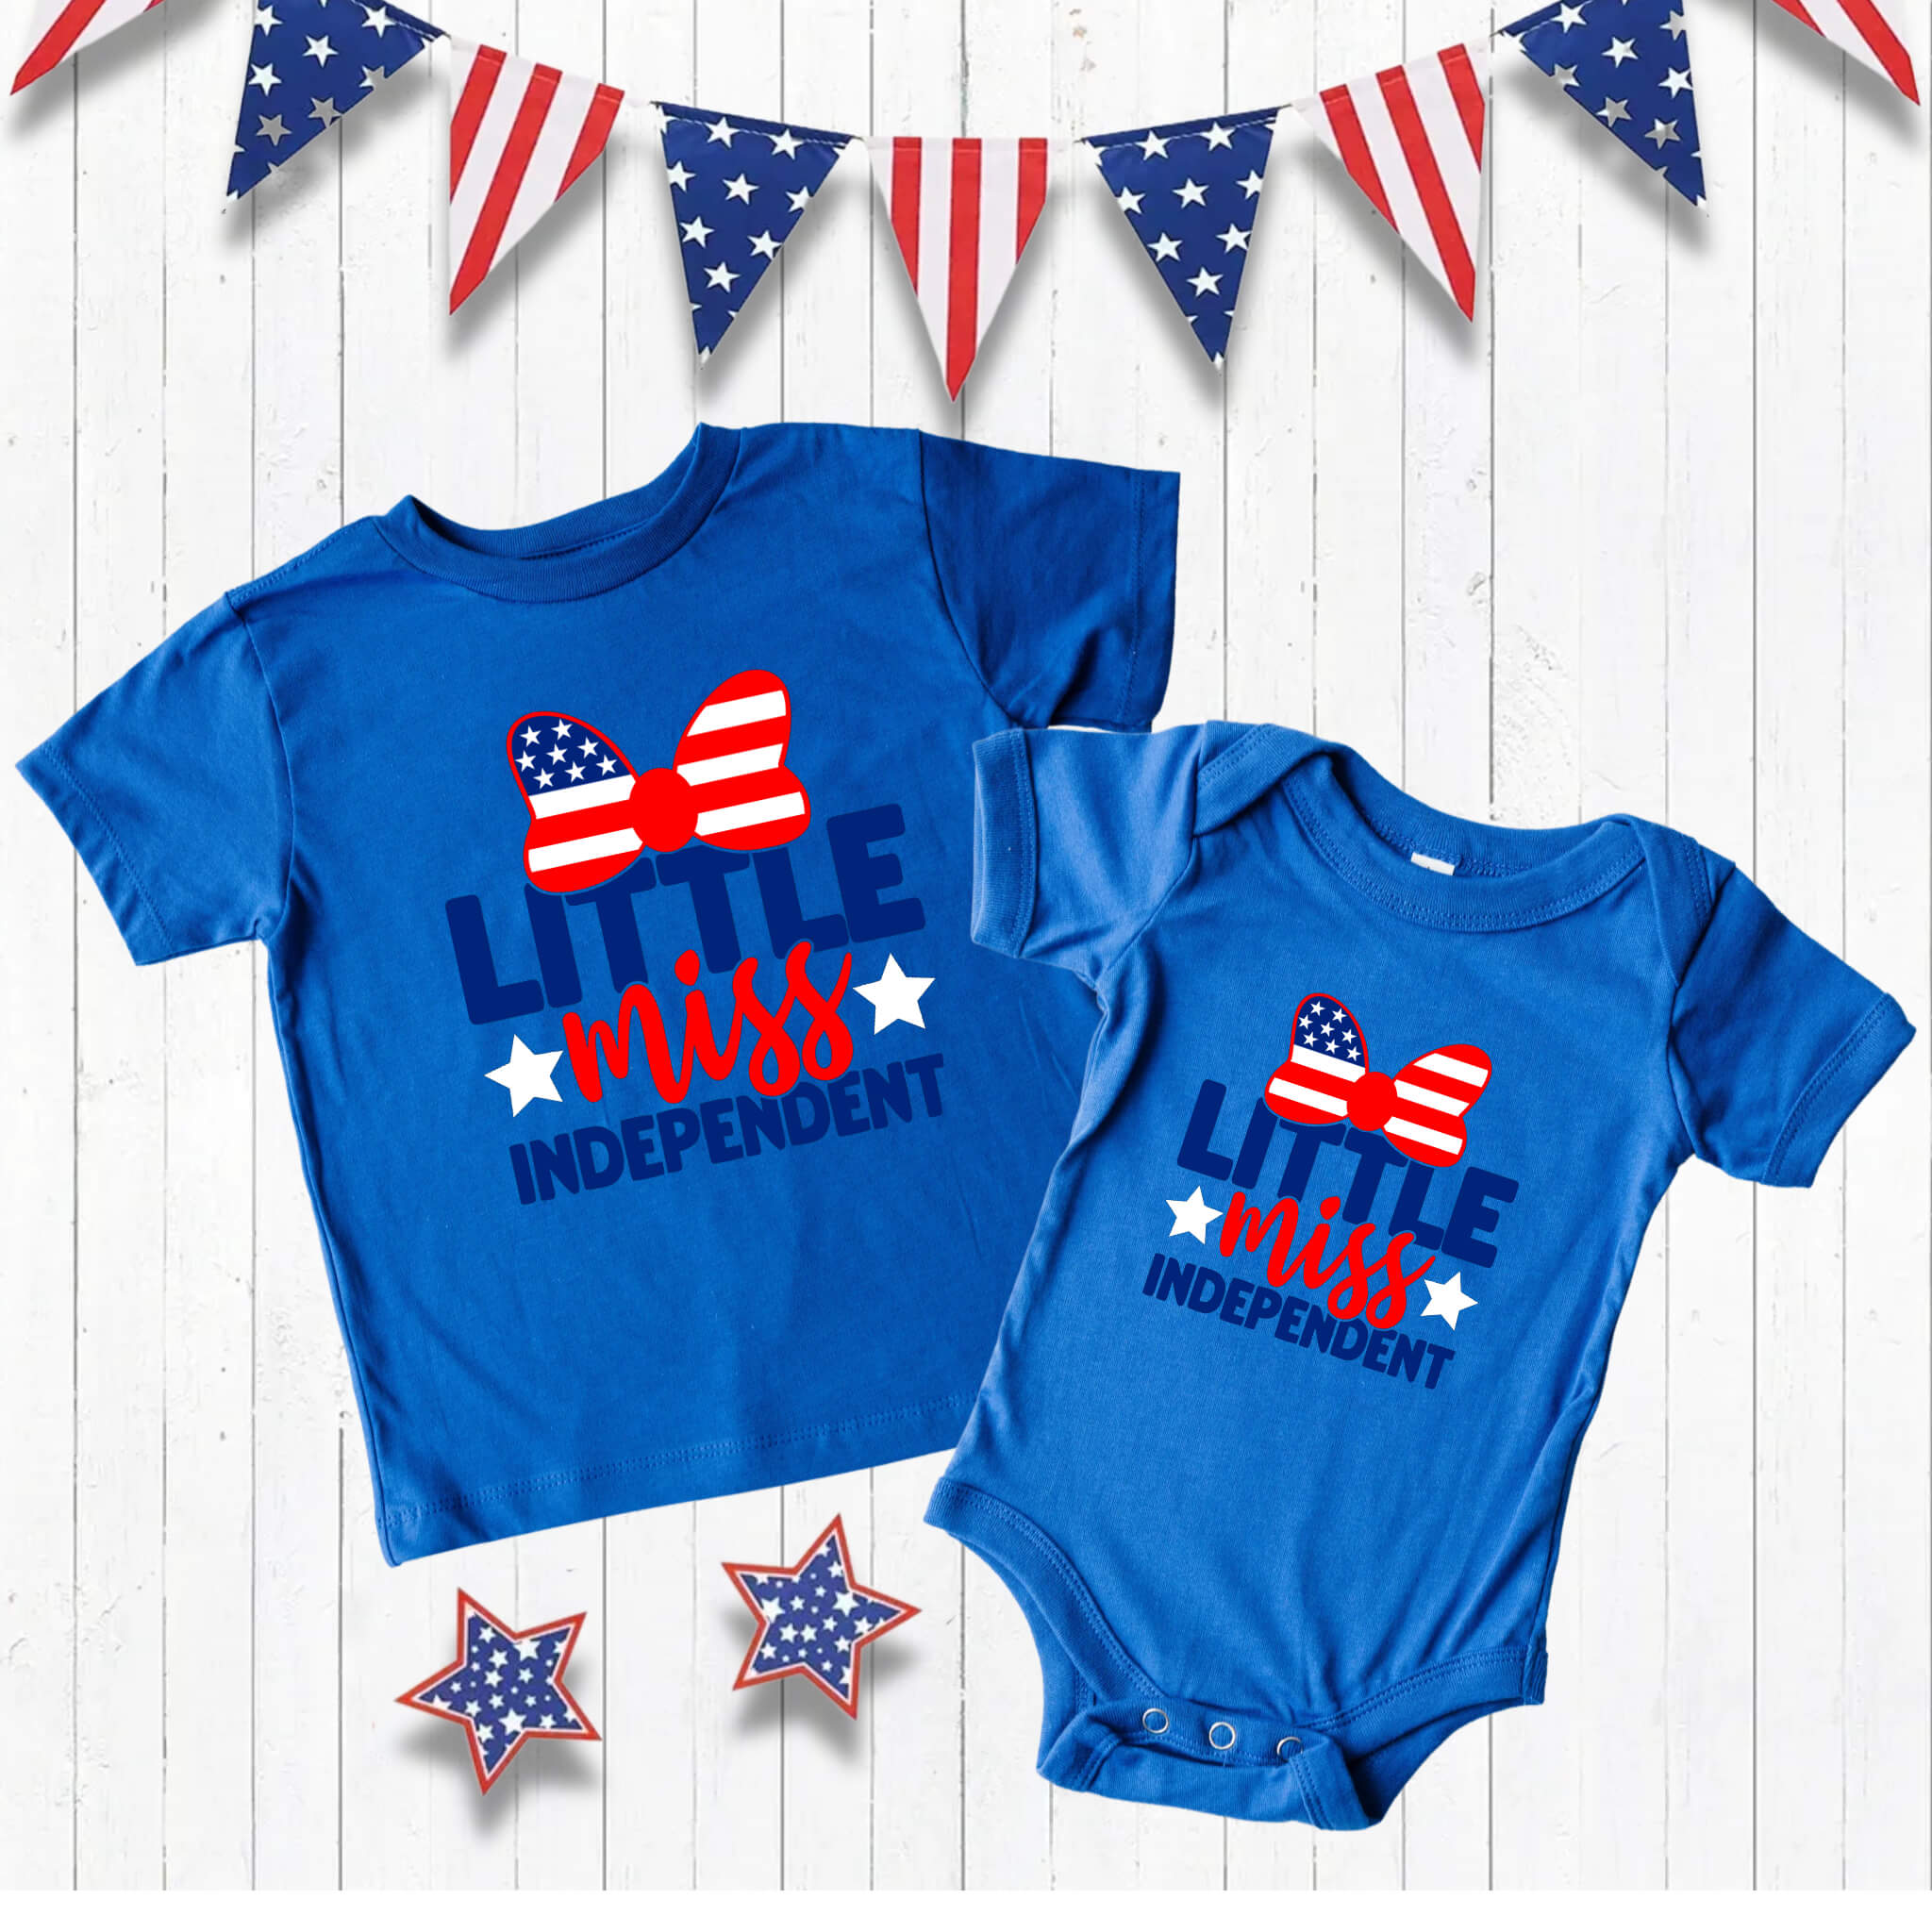 4th of July - Little Miss Independent Patriotic Girl’s Graphic Print Onesie / T-Shirt